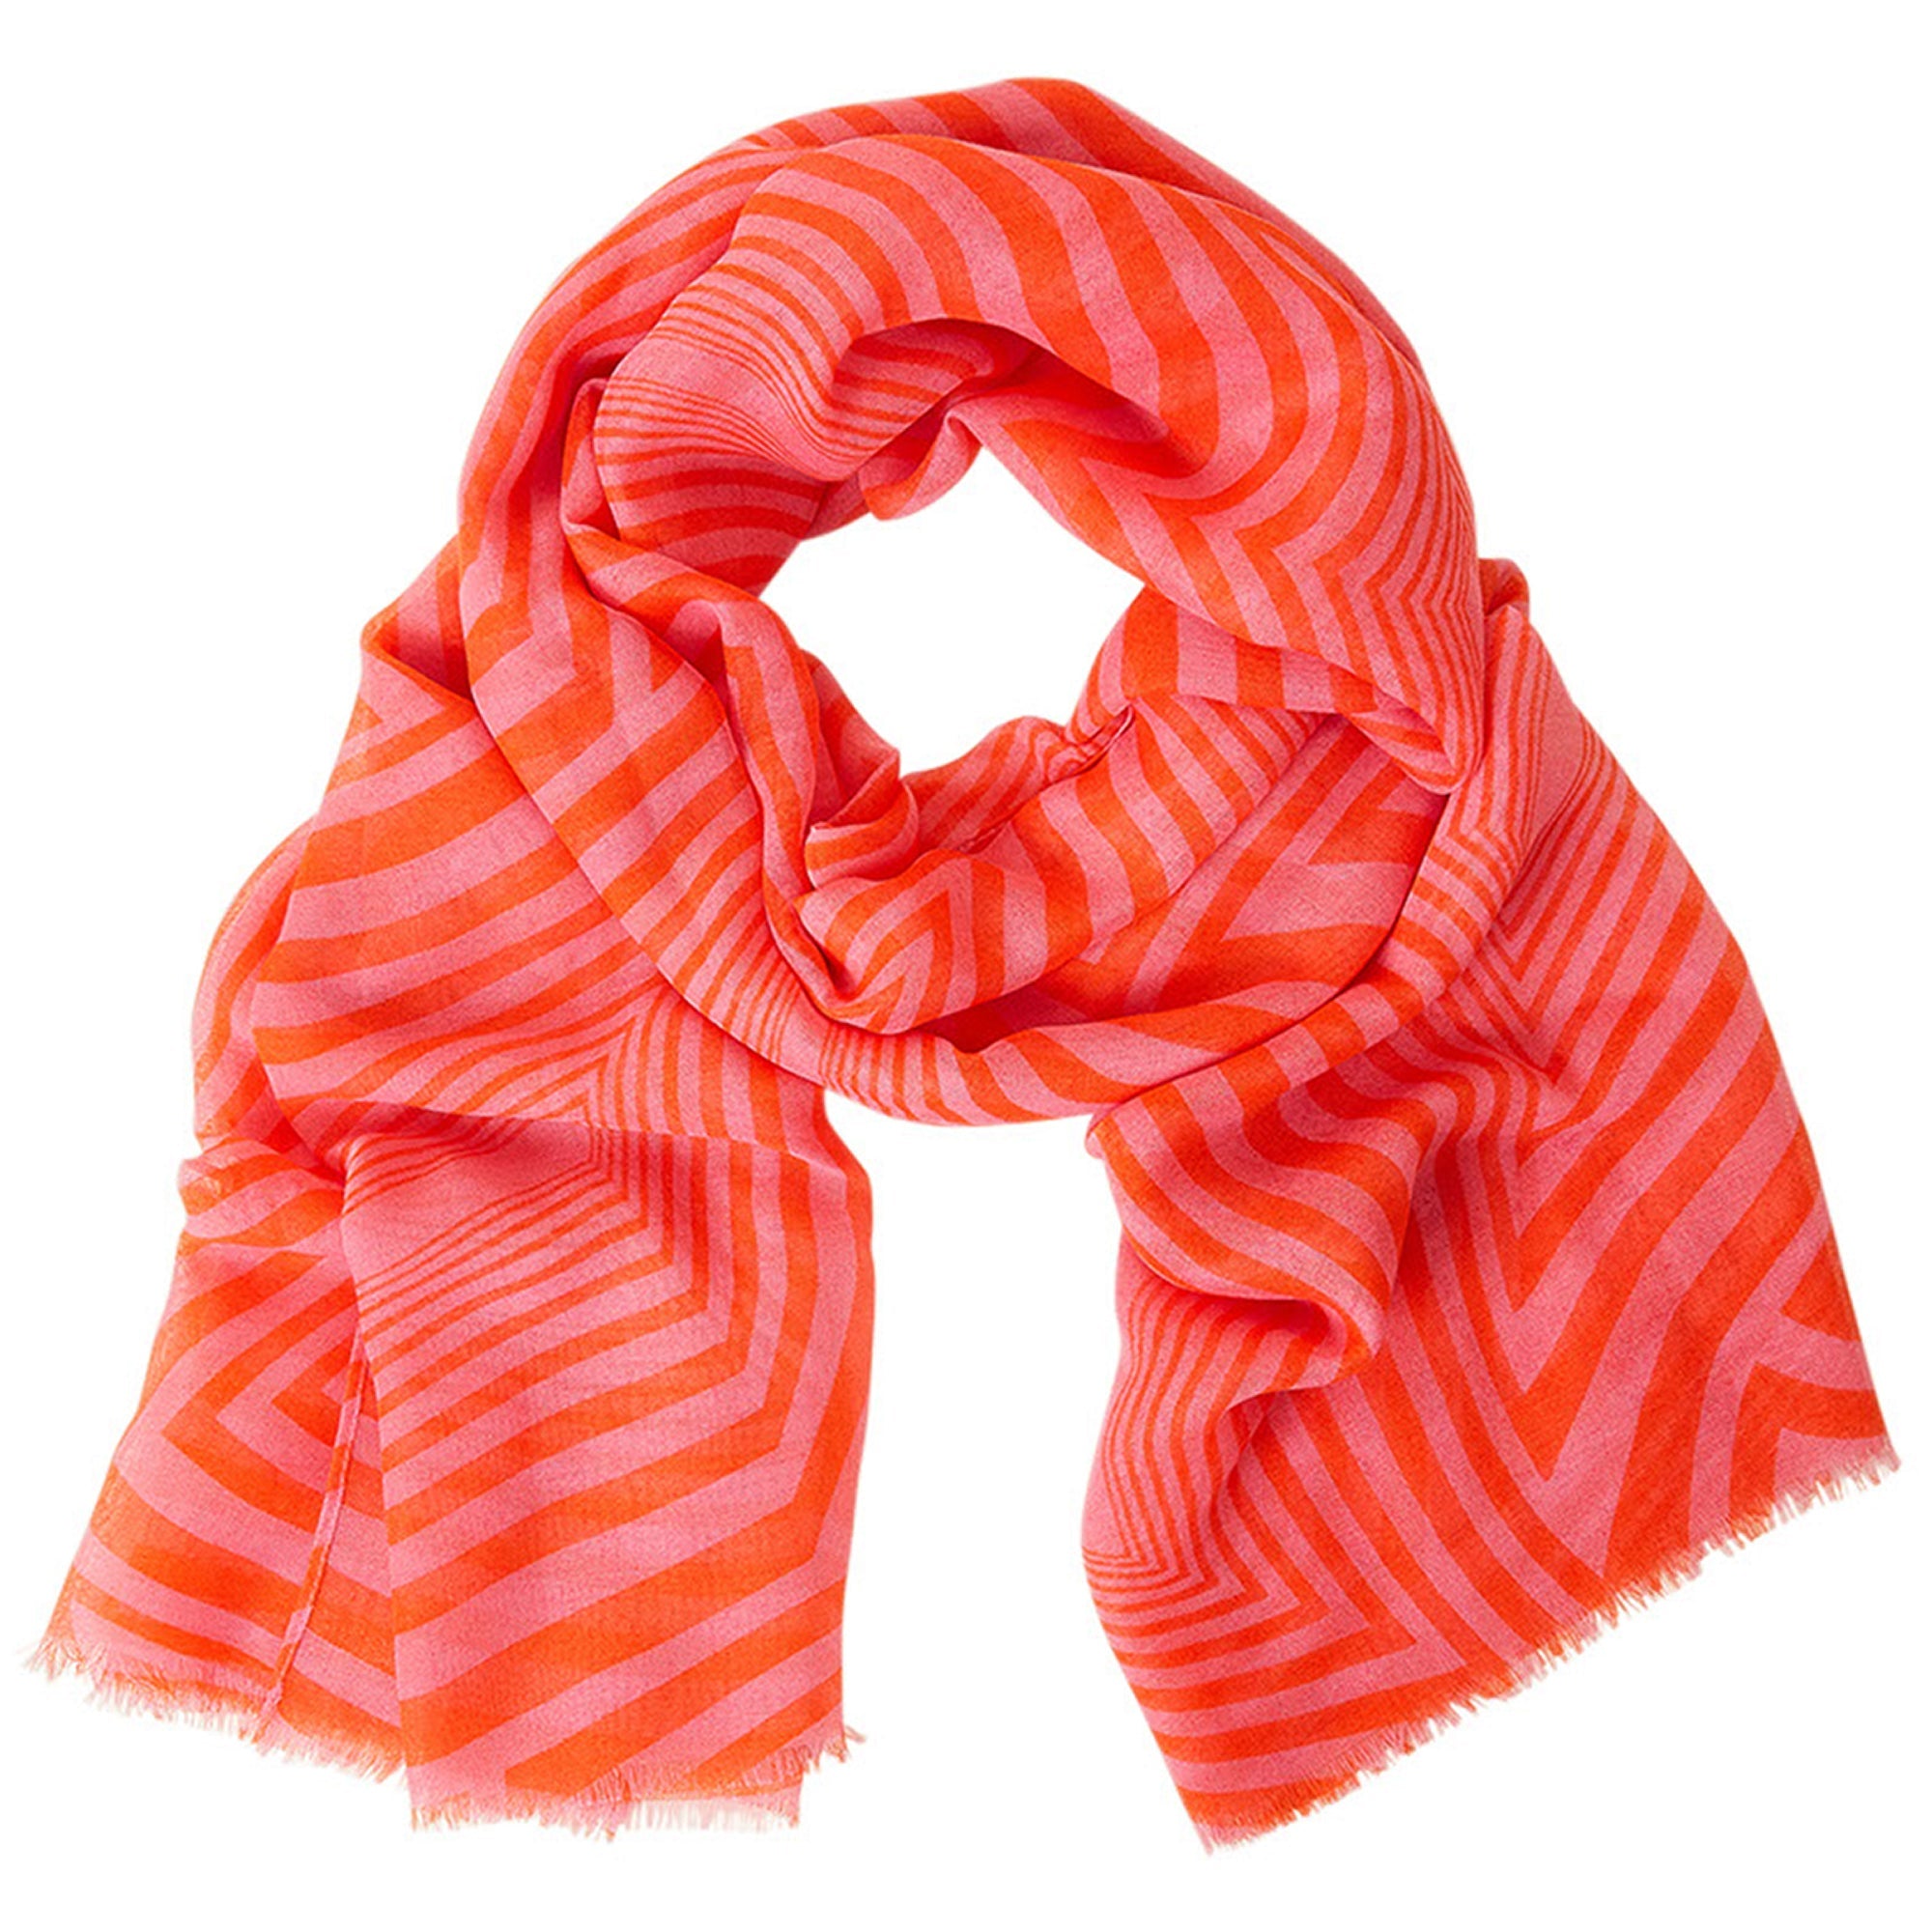 Accessorize London Women's Red Geo Printed Scarf